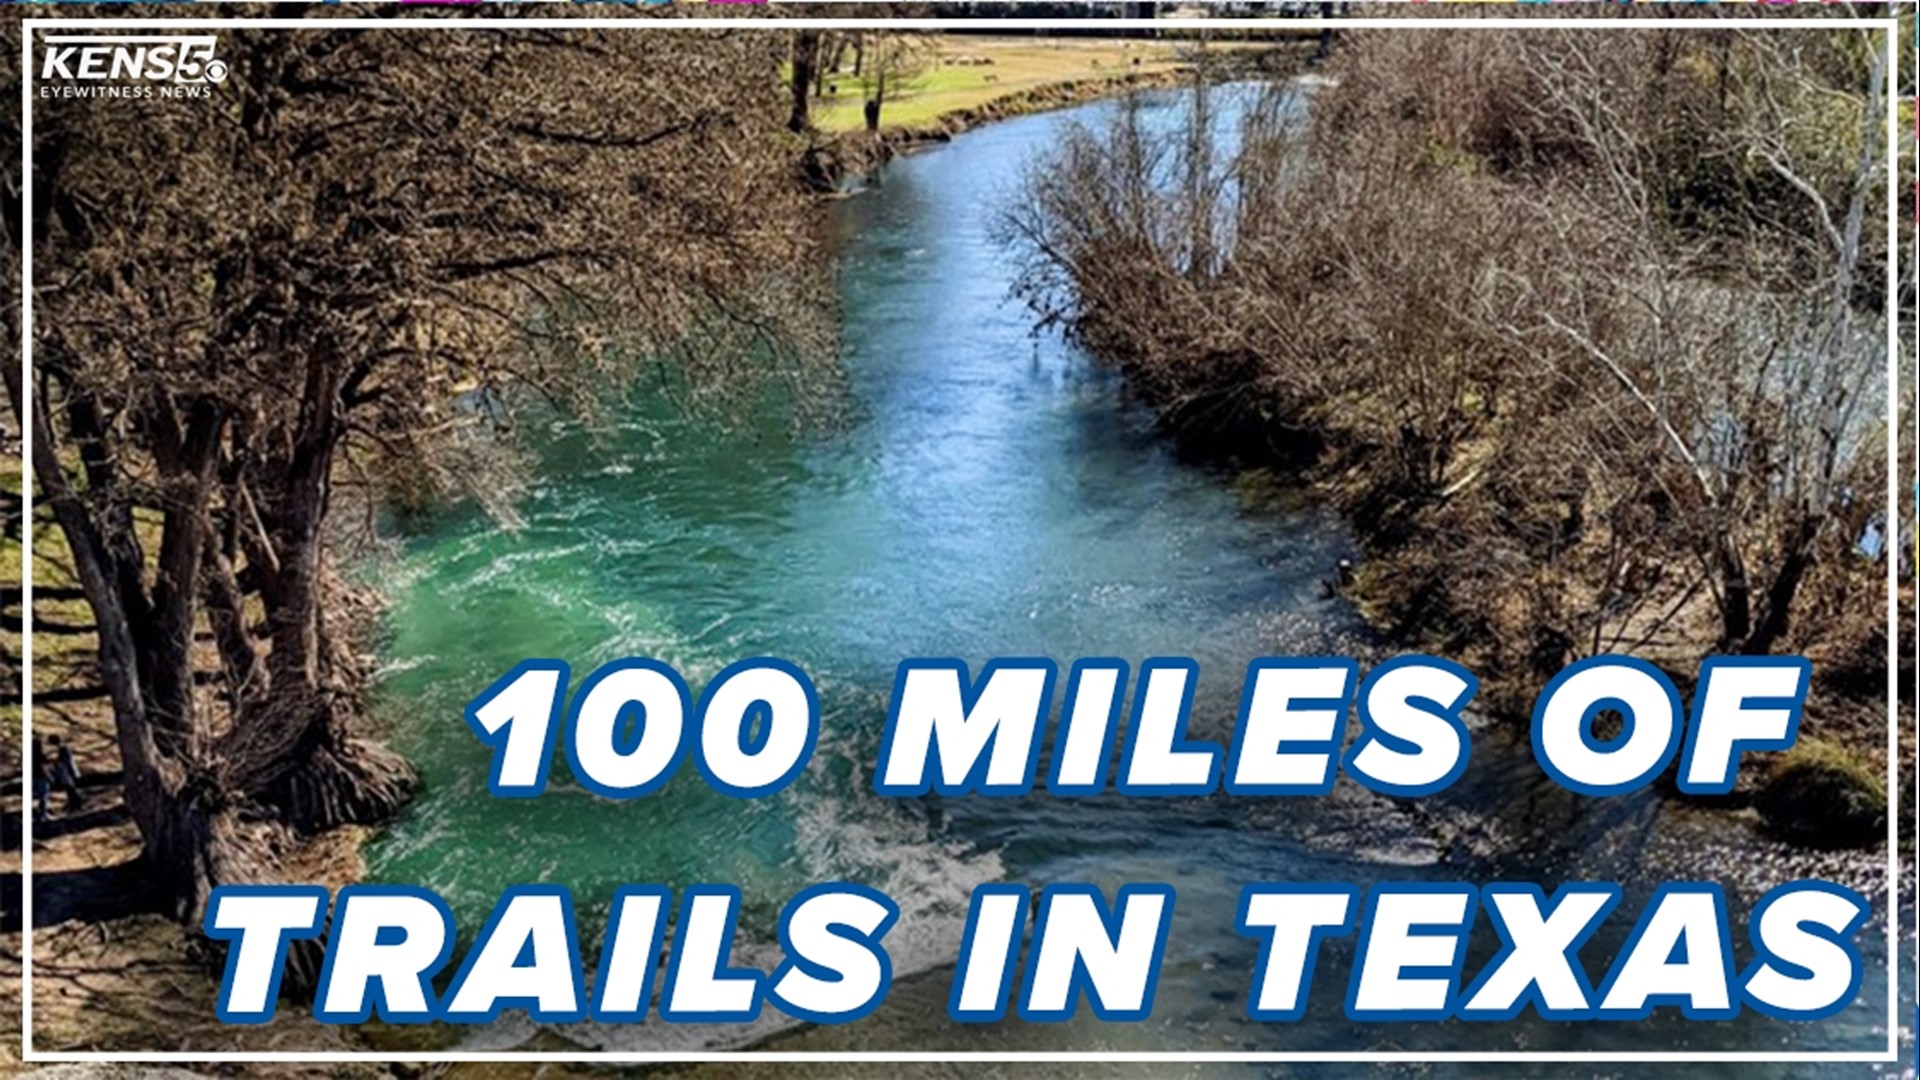 The Great Springs Project would connect San Antonio to Austin through 100 miles of a series of trails through famous and historic springs along the way.